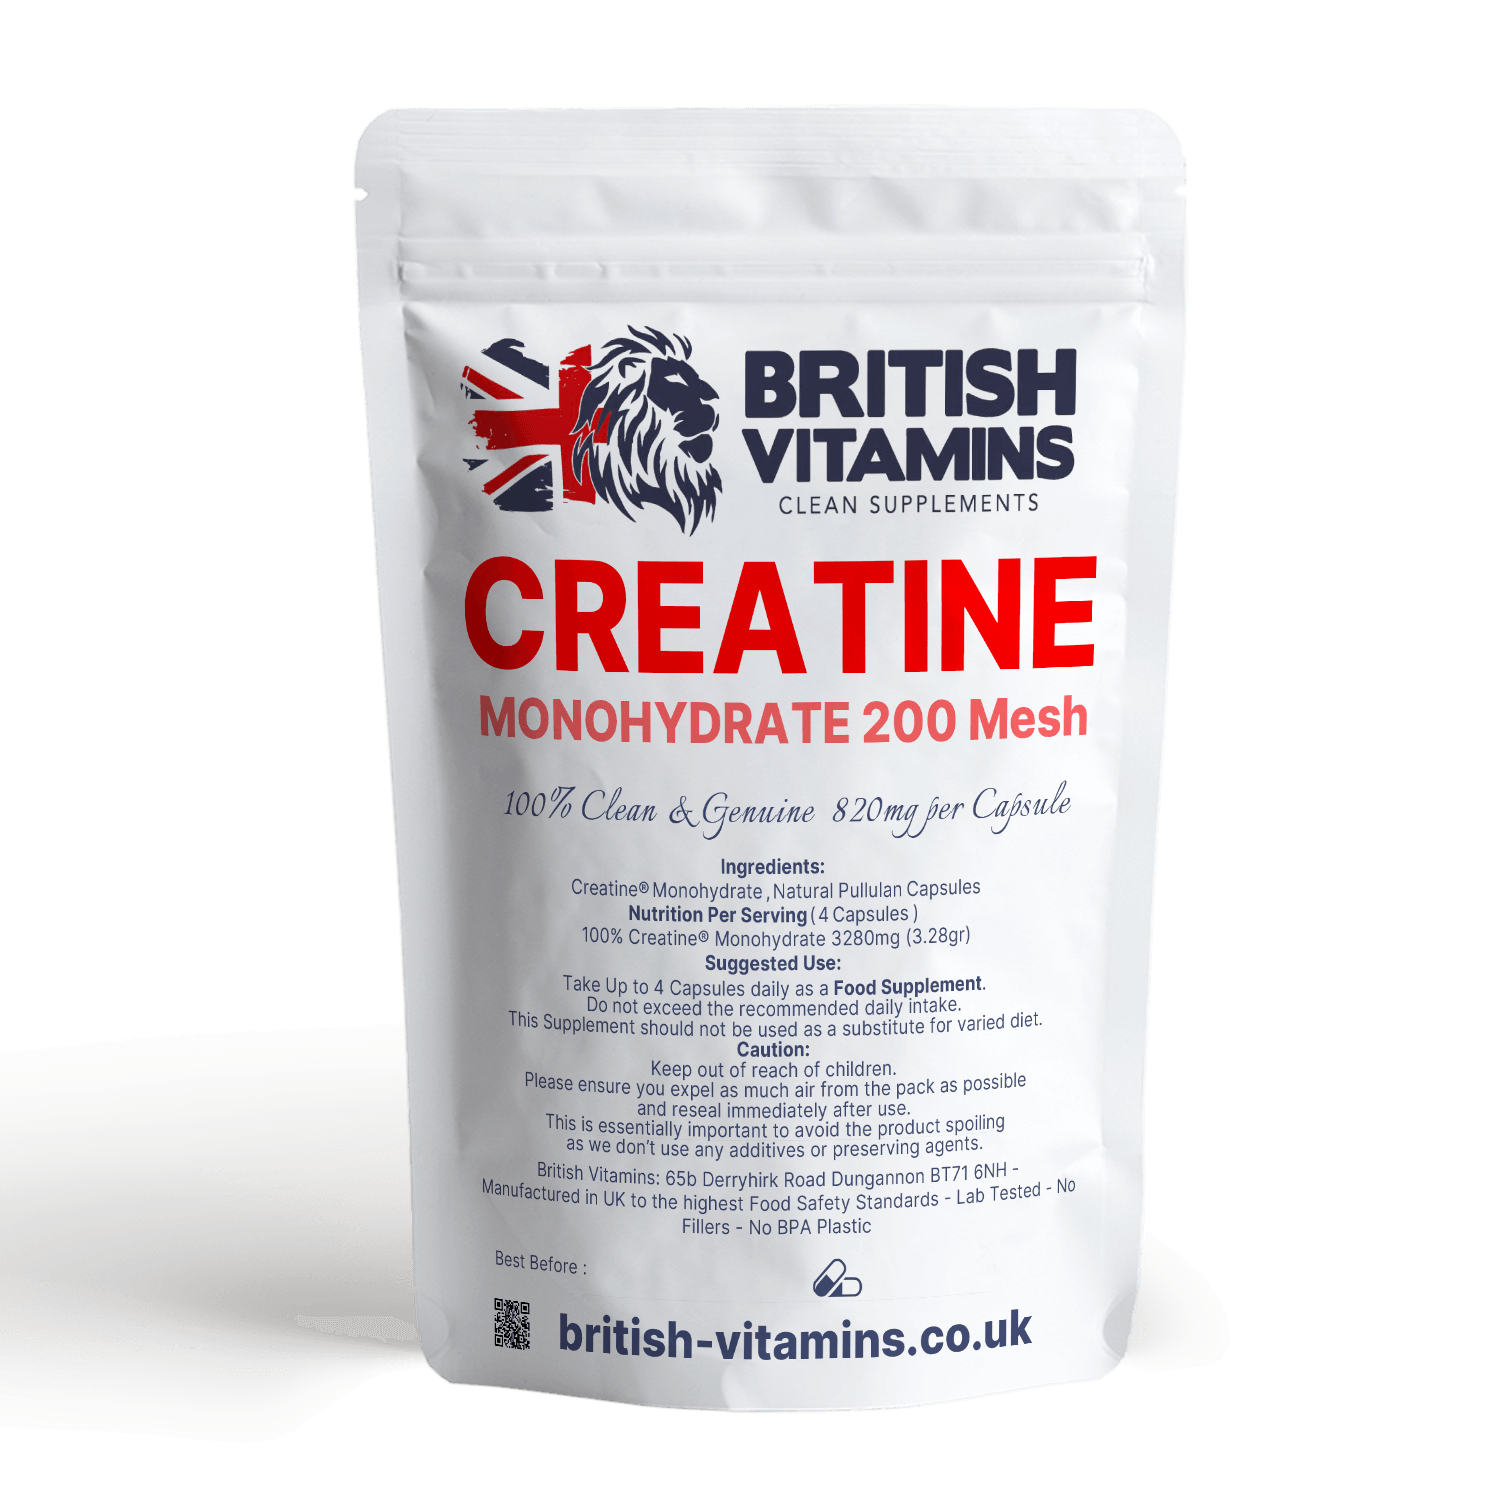 Creatine Monohydrate Capsules 3280mg Serving Health & Beauty:Vitamins & Lifestyle Supplements:Sports Supplements:Protein Shakes & Bodybuilding British Vitamins   